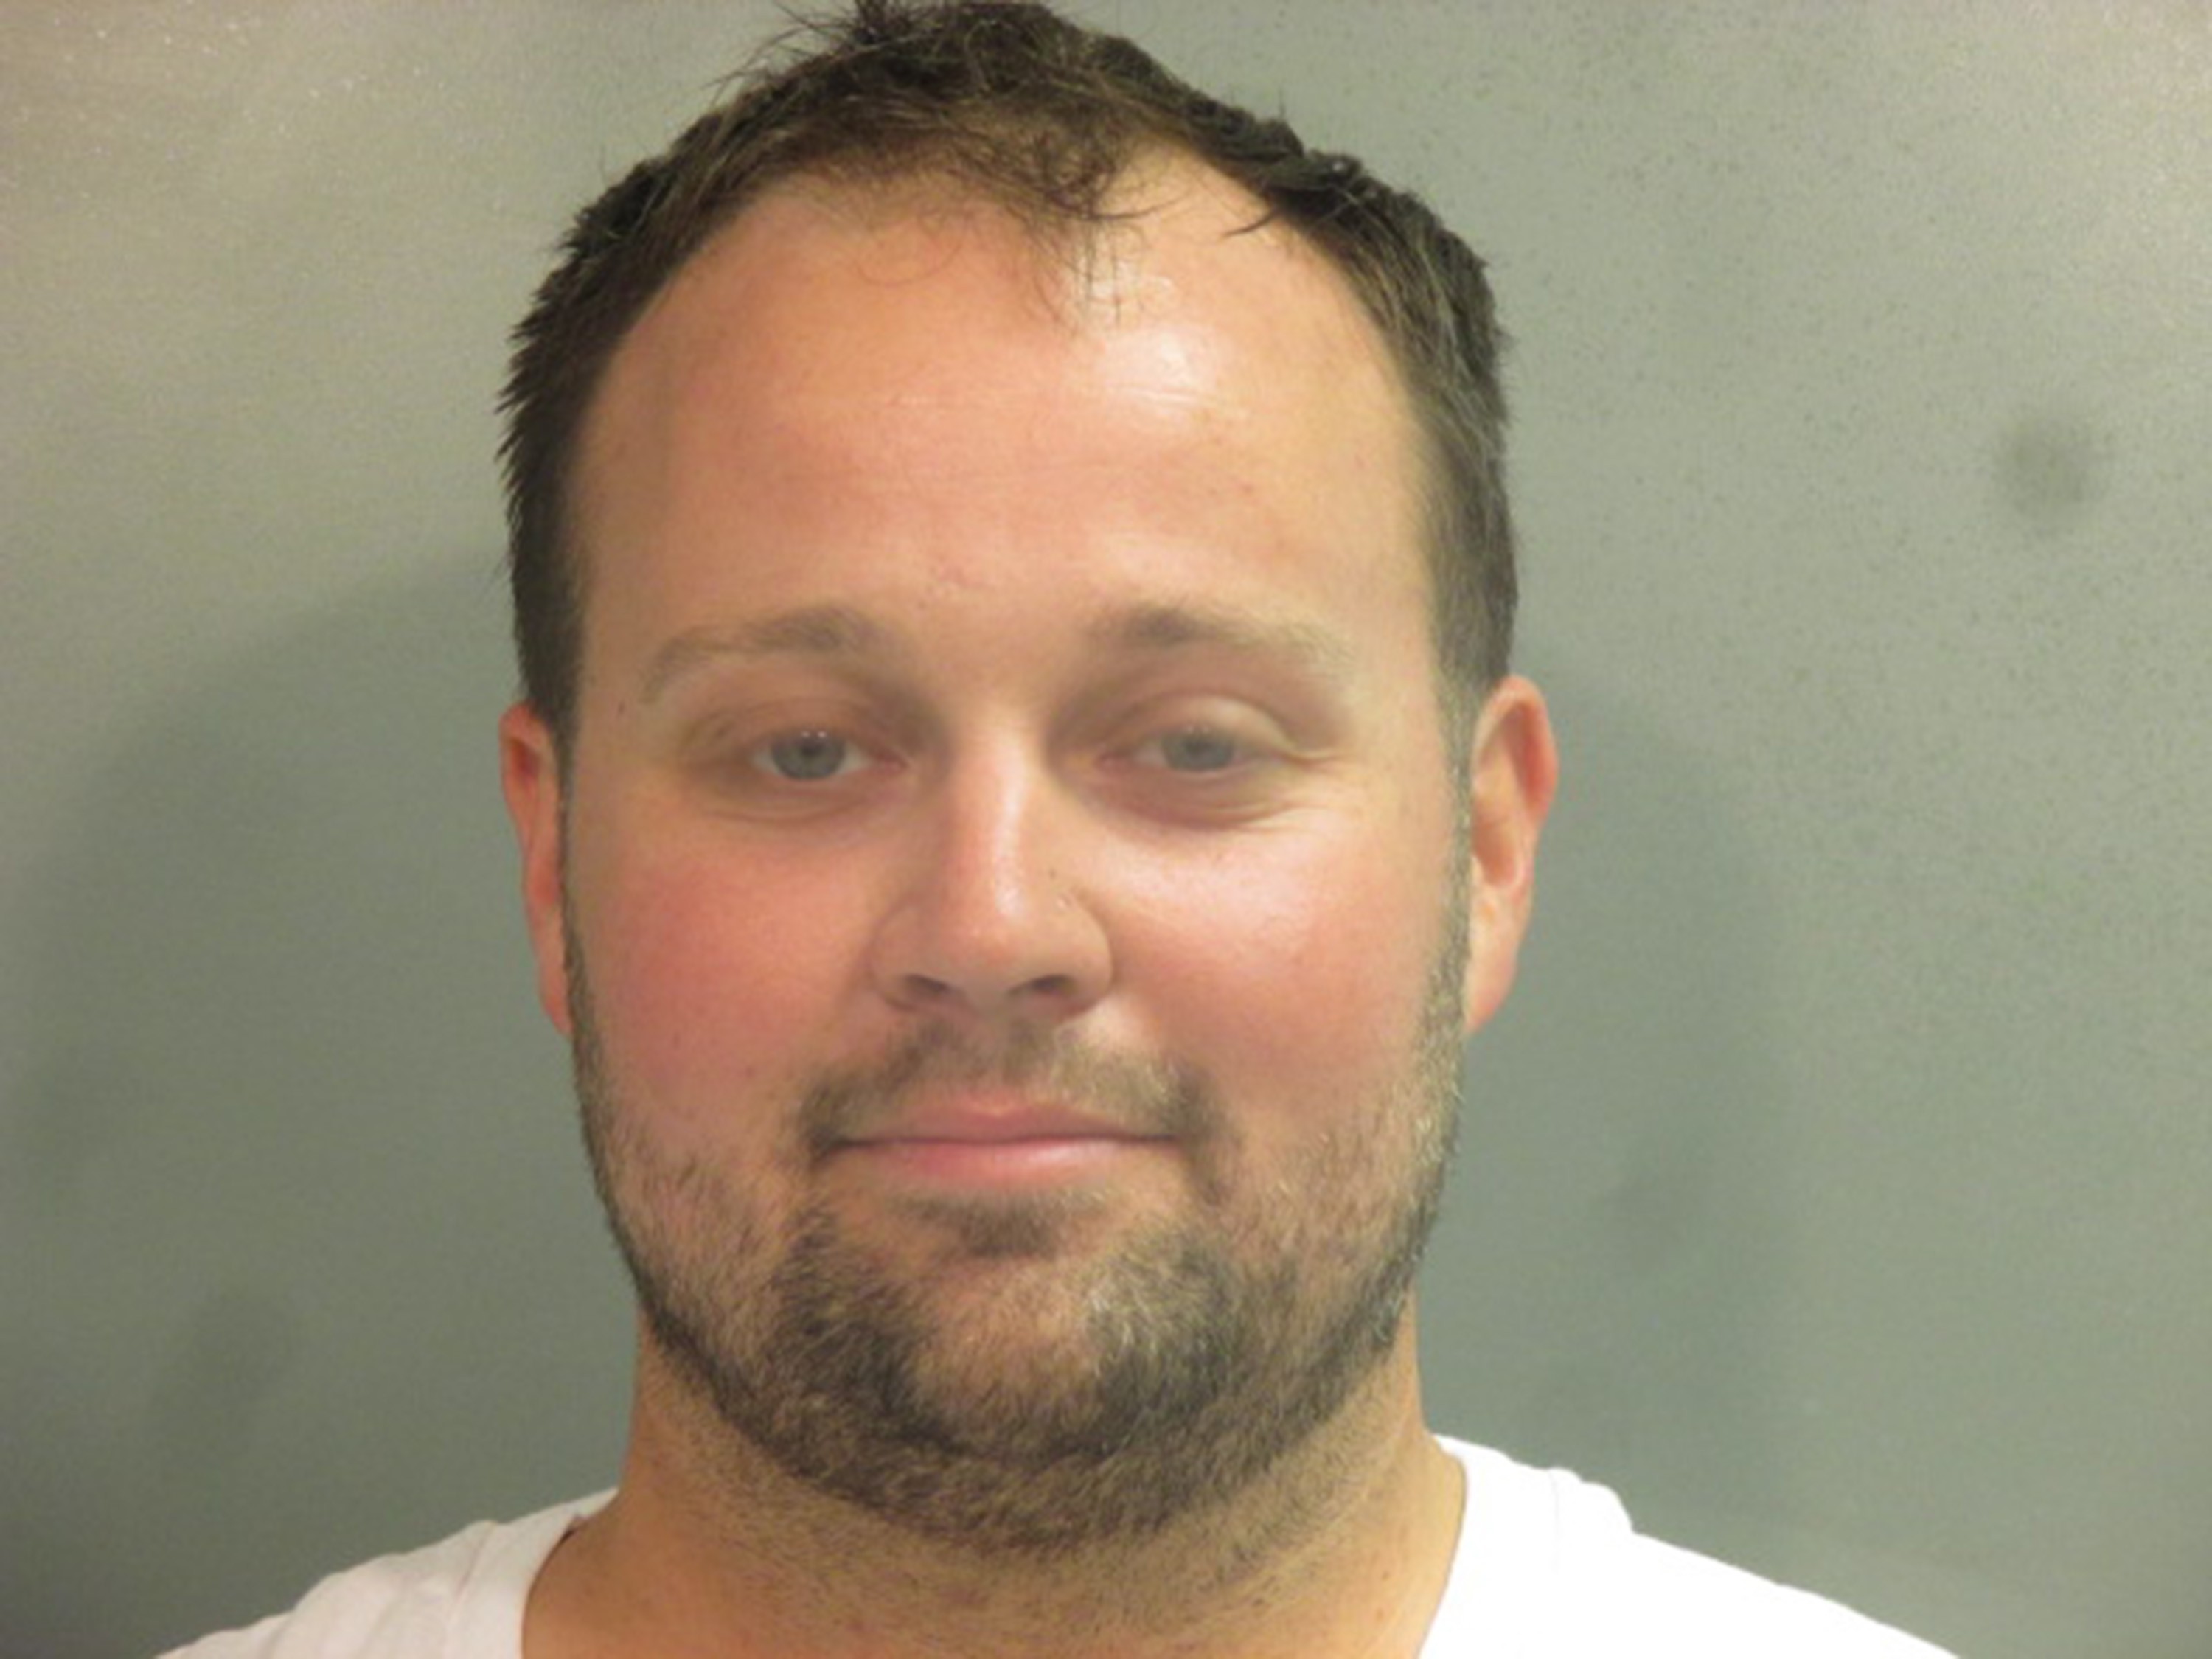 FAYETTEVILLE, AR - APRIL 29: In this handout photo provided by the Washington County Sheriff’s Office, former television personality on "19 Kids And Counting" Josh Duggar poses for a booking photo after his arrest April 29, 2021 in Fayetteville, Arkansas. (Foto: Washington County Sheriff’s Offi)